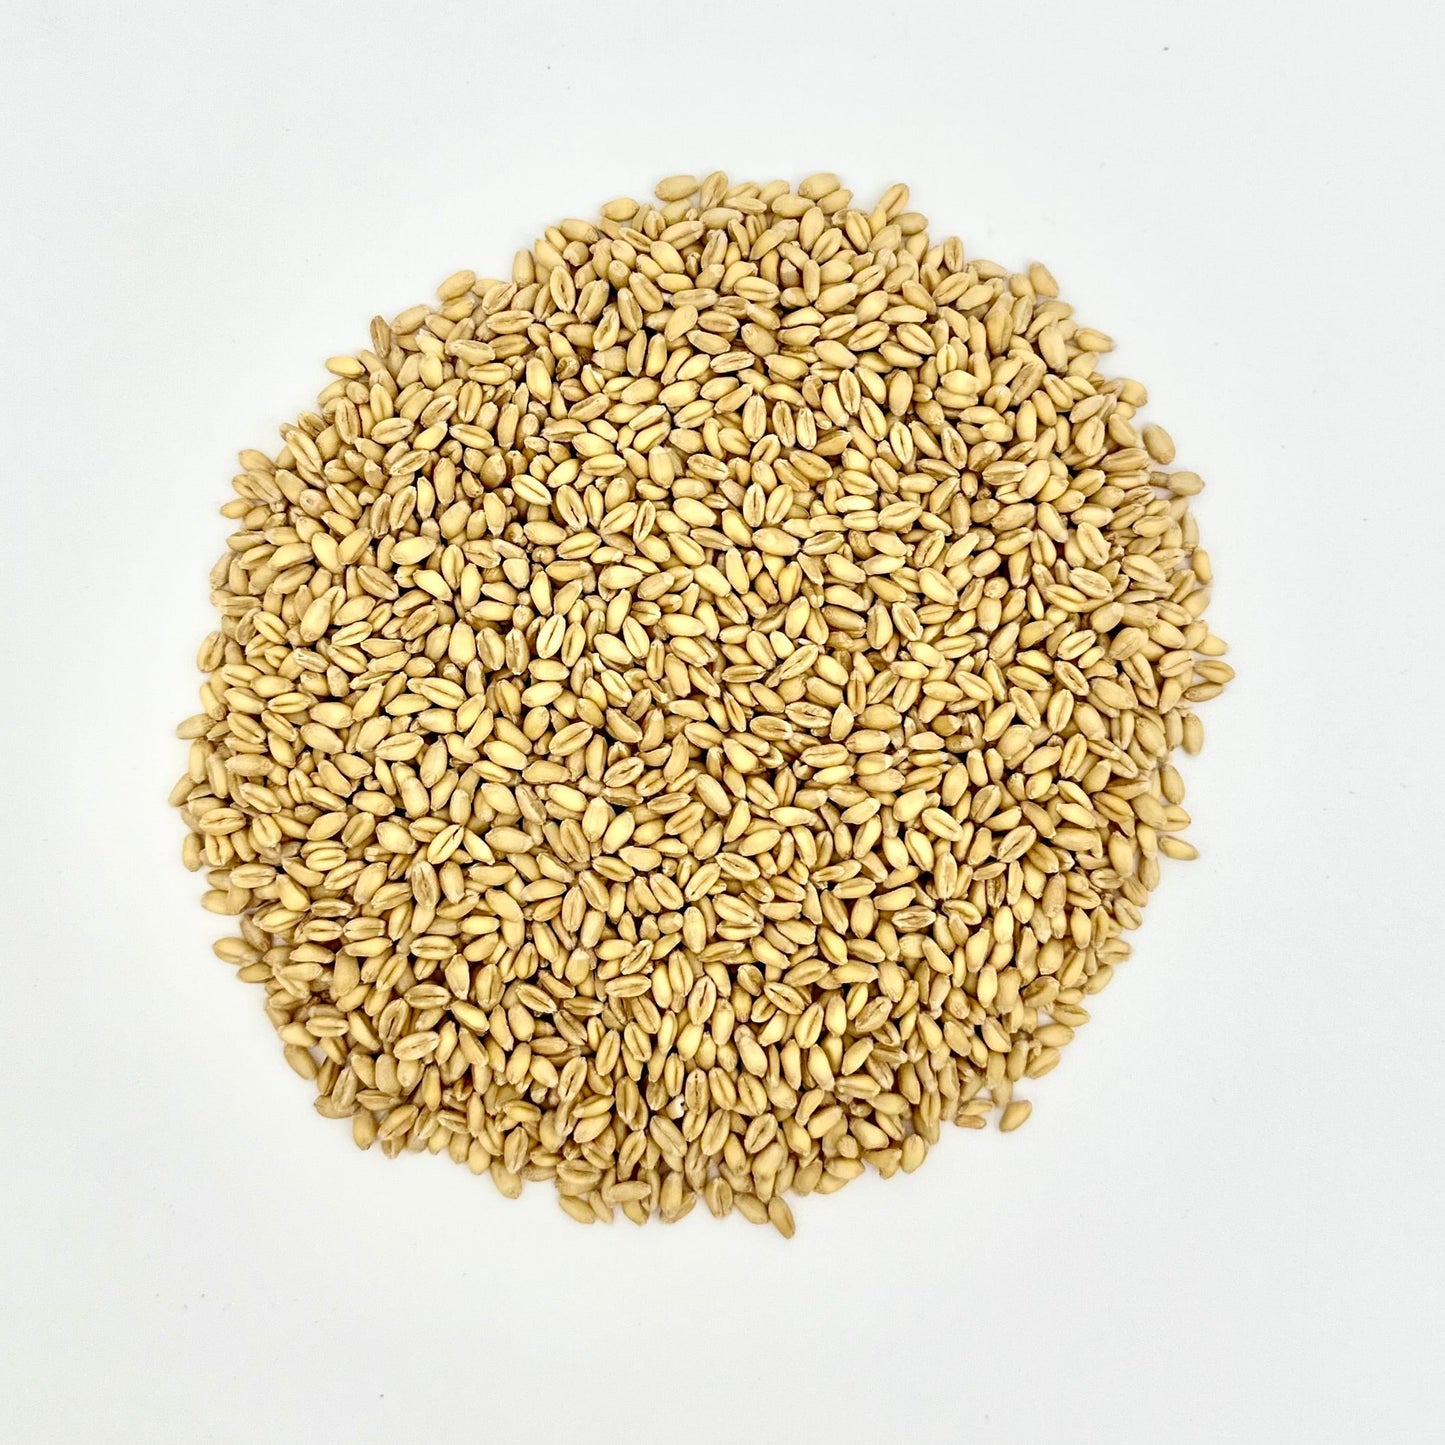 Wheatland™ Soft White Wheat Berries • 23 lbs • Delicious • Healthy Food Option • Farm Fresh • Mylar and Bucket Provide 25 Year Shelf Life • Emergency Food Storage • Non-GMO • Lab Tested Chemical-Free • Premium Baking Quality • Sproutable